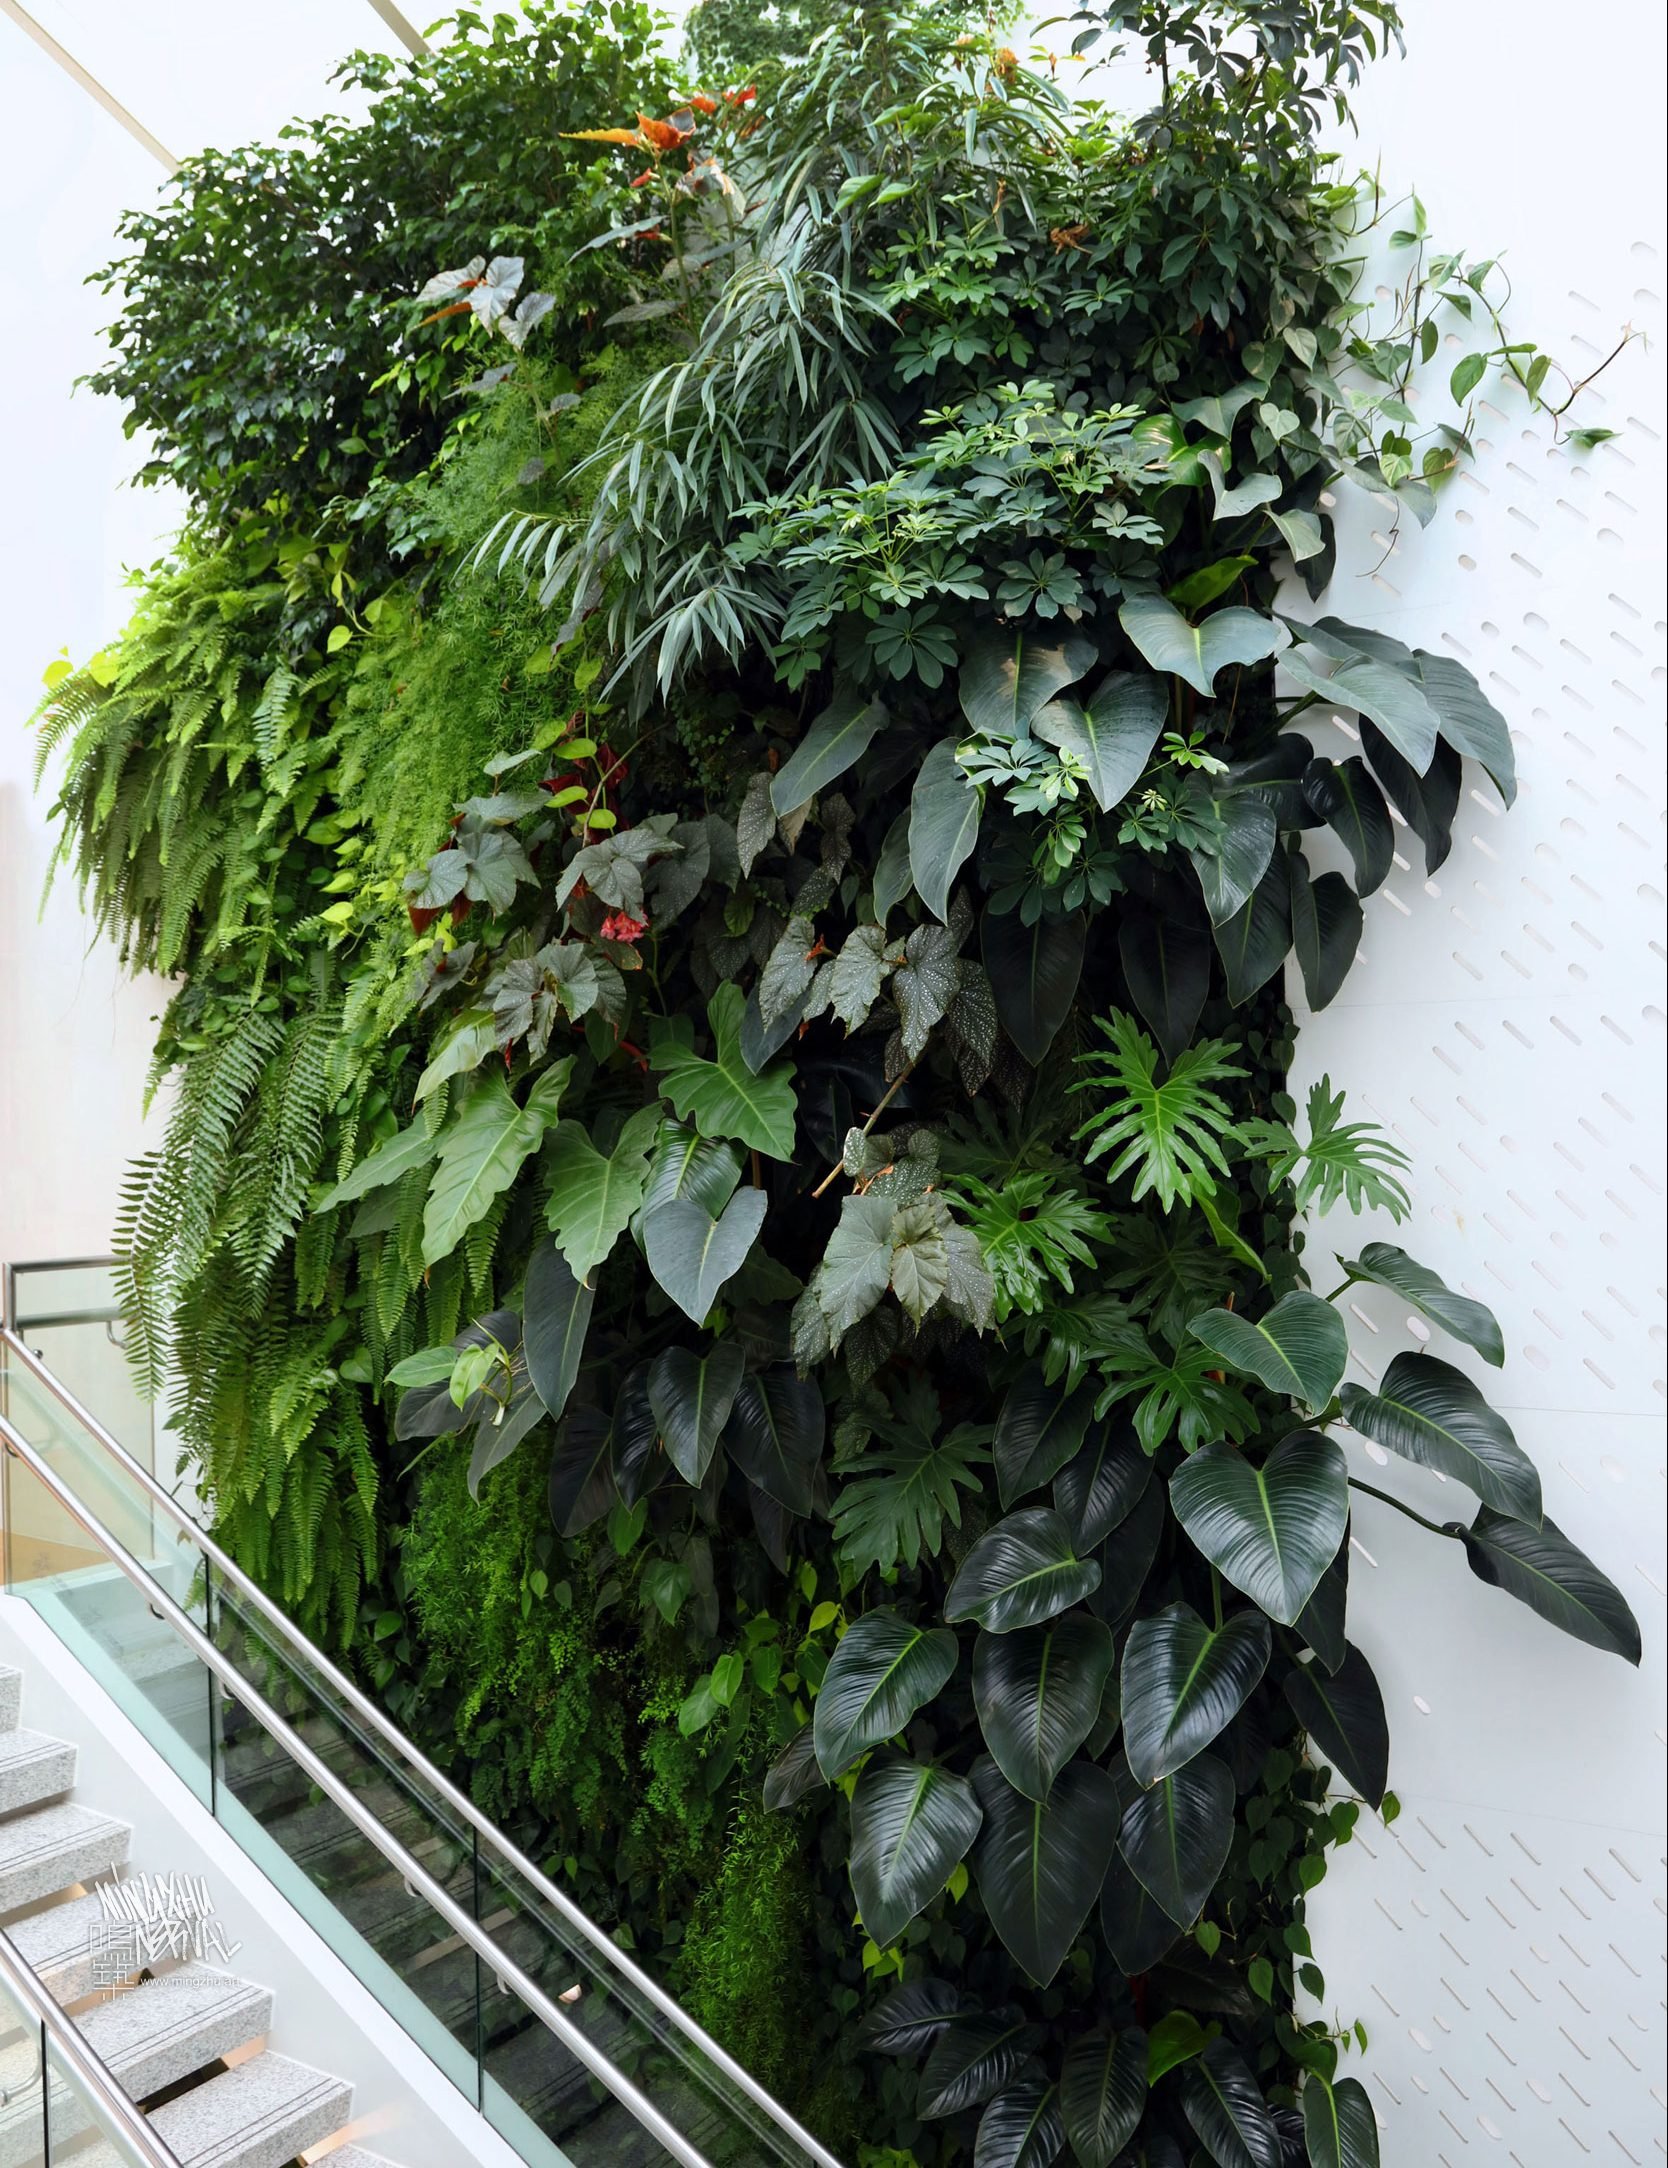 At Mingzhu Nerval, we thrive at creating the most beautiful vertical gardens in the world. For Nu Skin, we created an awesome living wall design - Shanghai, 2013.